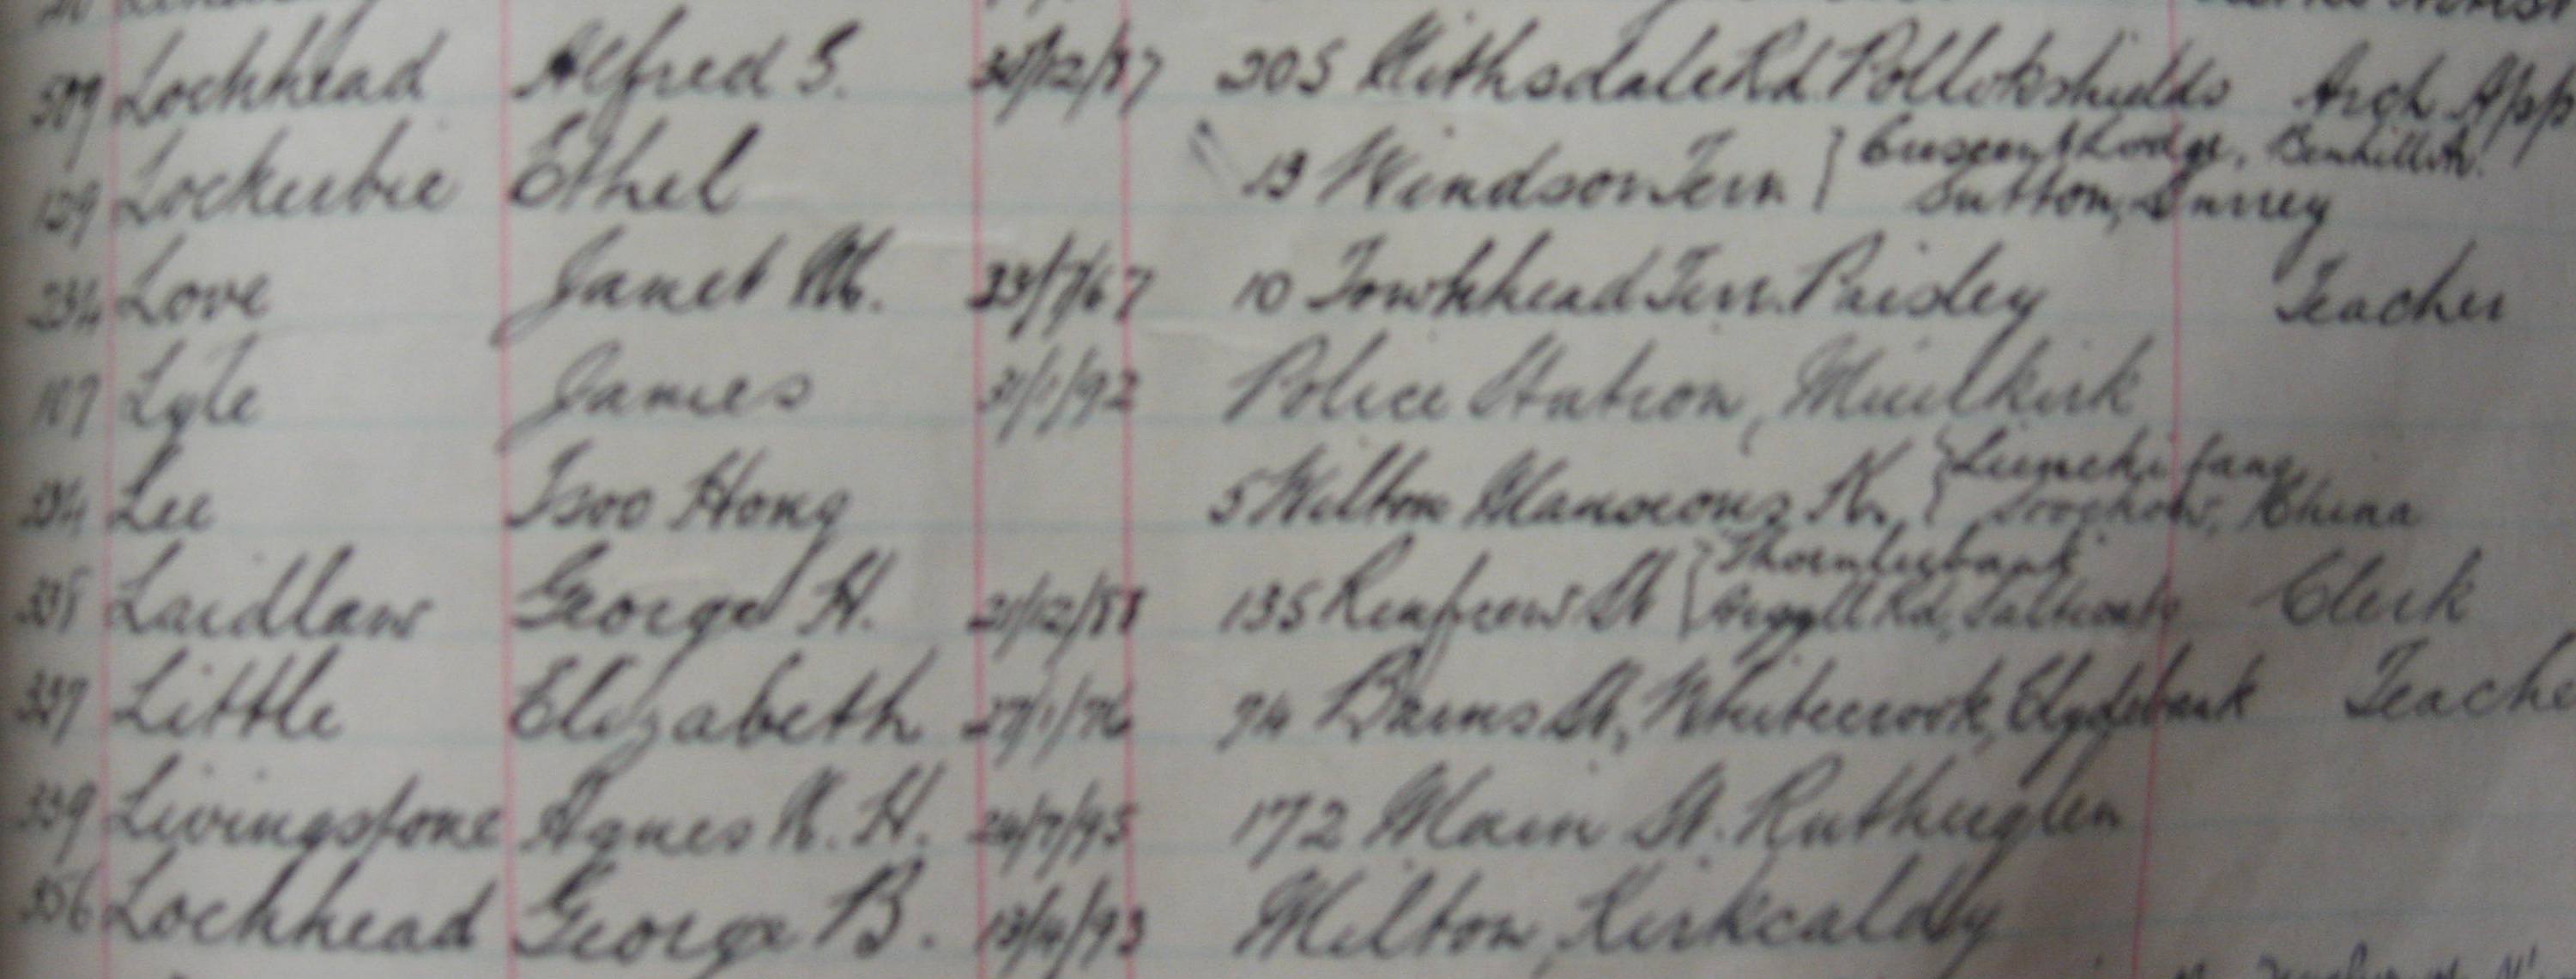 GSA student register shows Chinese student Tsoo Hong Lee was a student at the School from 1907-1912, and also tell us where he lived while he was in Glasgow